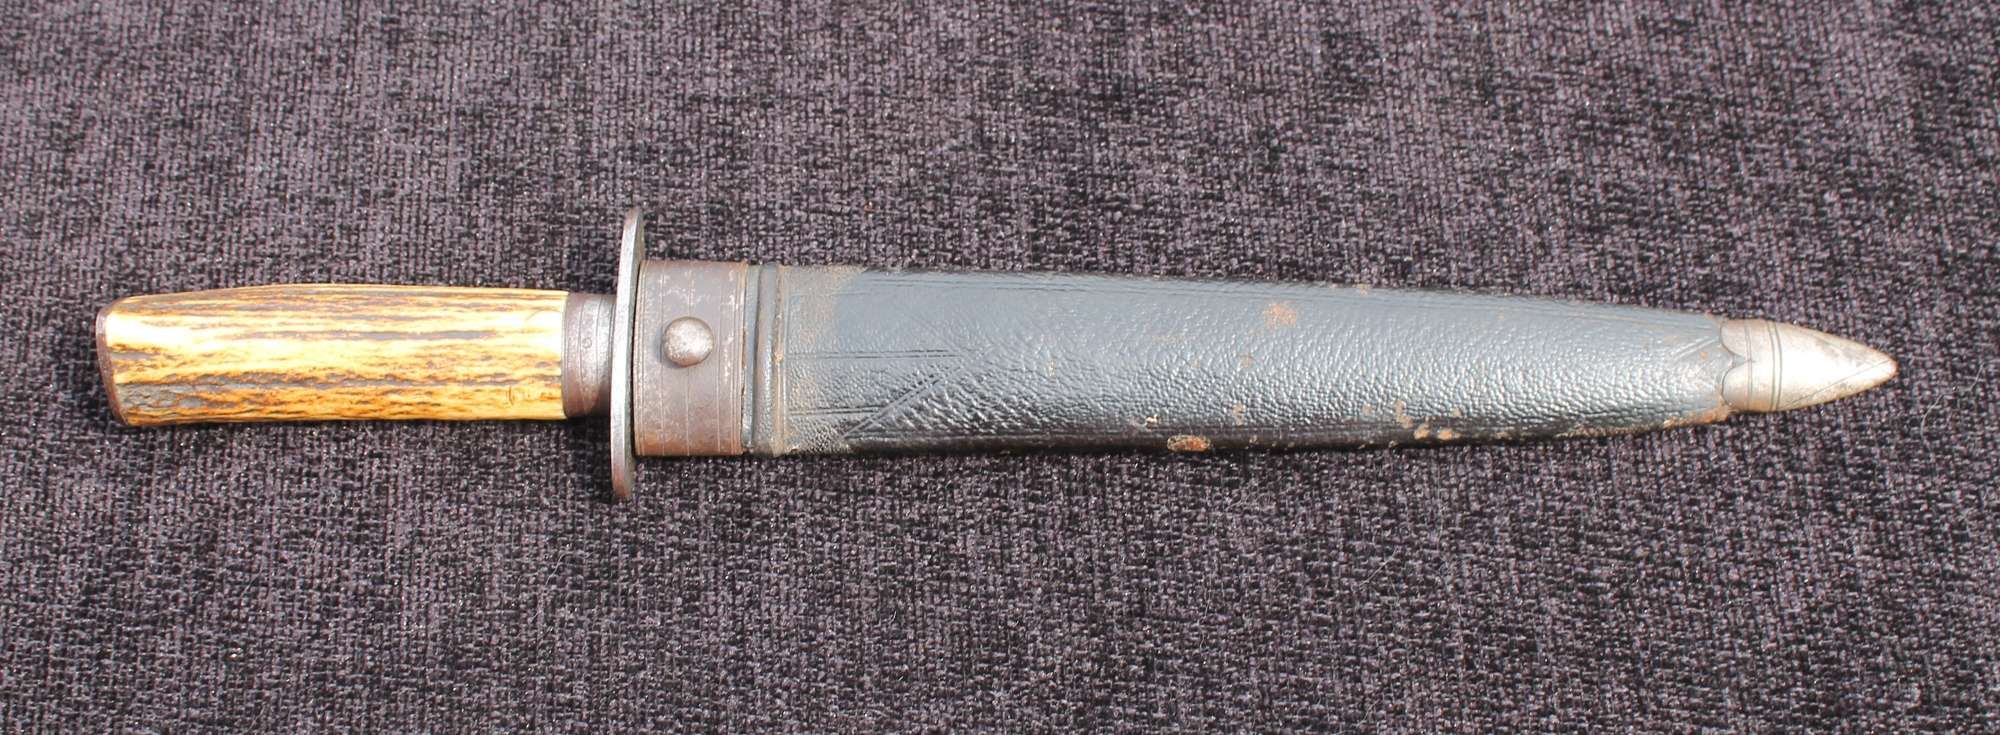 Superb Anglo Indian Bowie Knife